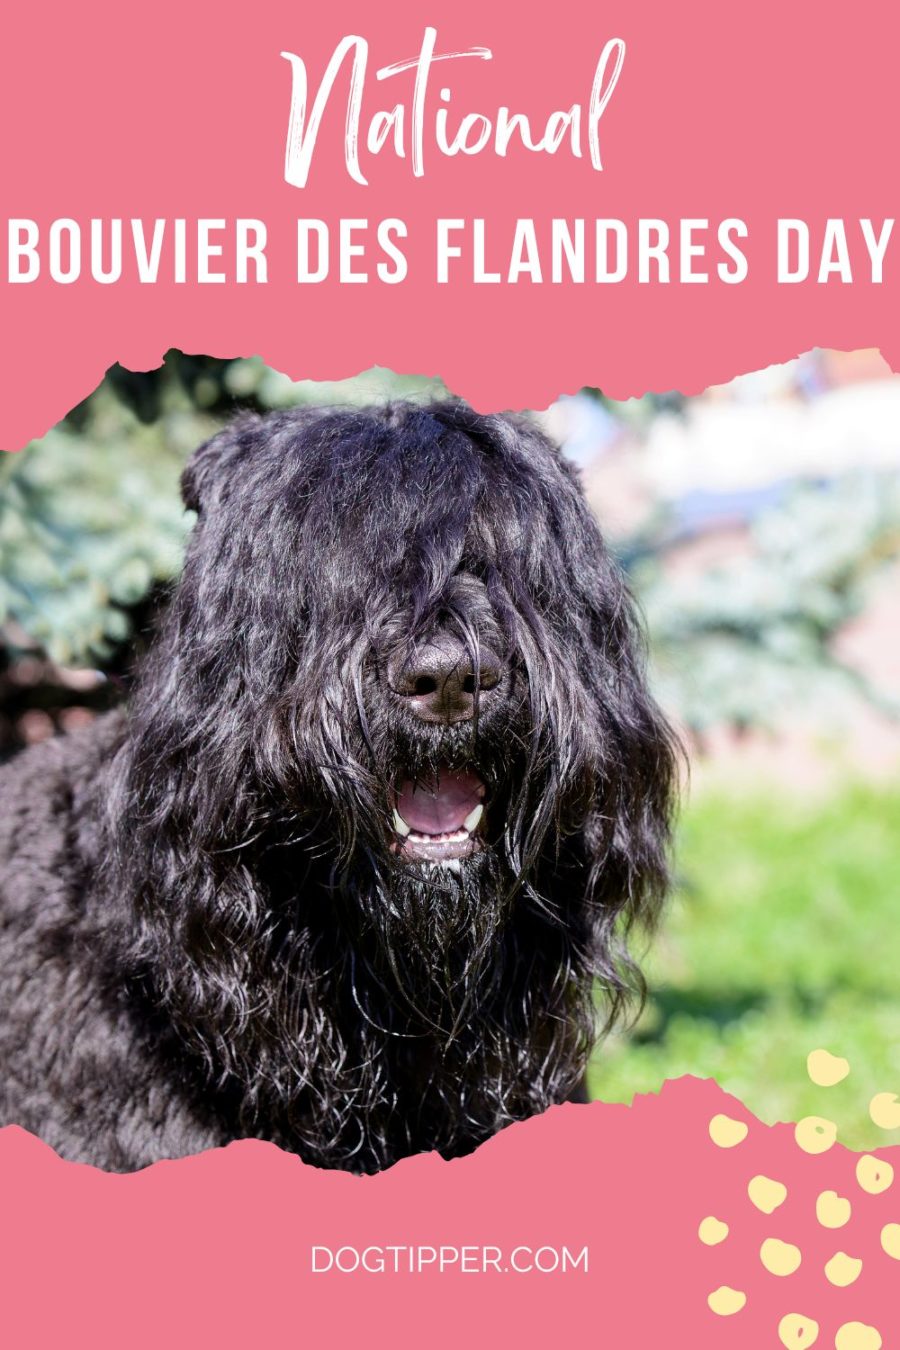 January 16th has been declared National Bouvier des Flandres Day.